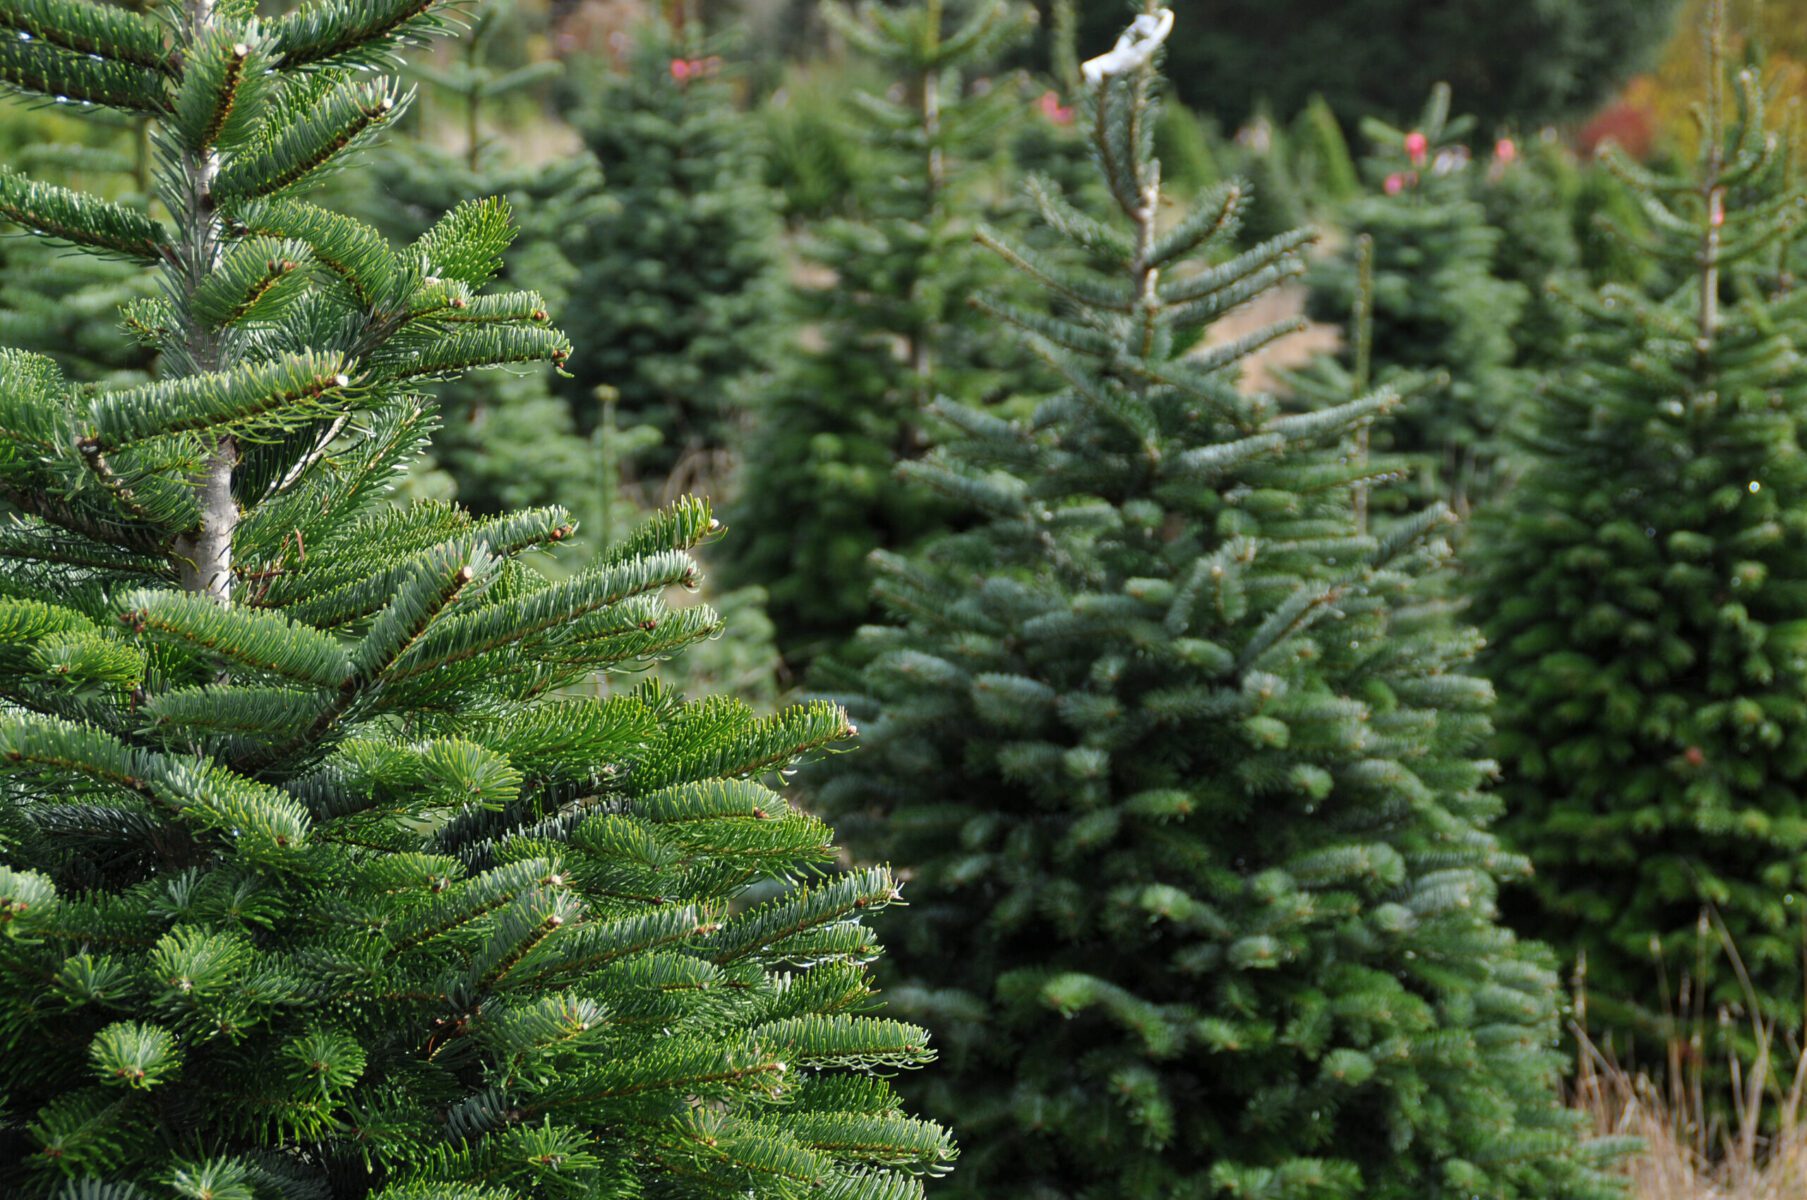 The Holiday Magic Begins at Orange County, N.Y. Christmas Tree Farms Cut Your Own or Find the Perfect Fresh-Cut Tree from One of the County’s Picturesque Farms